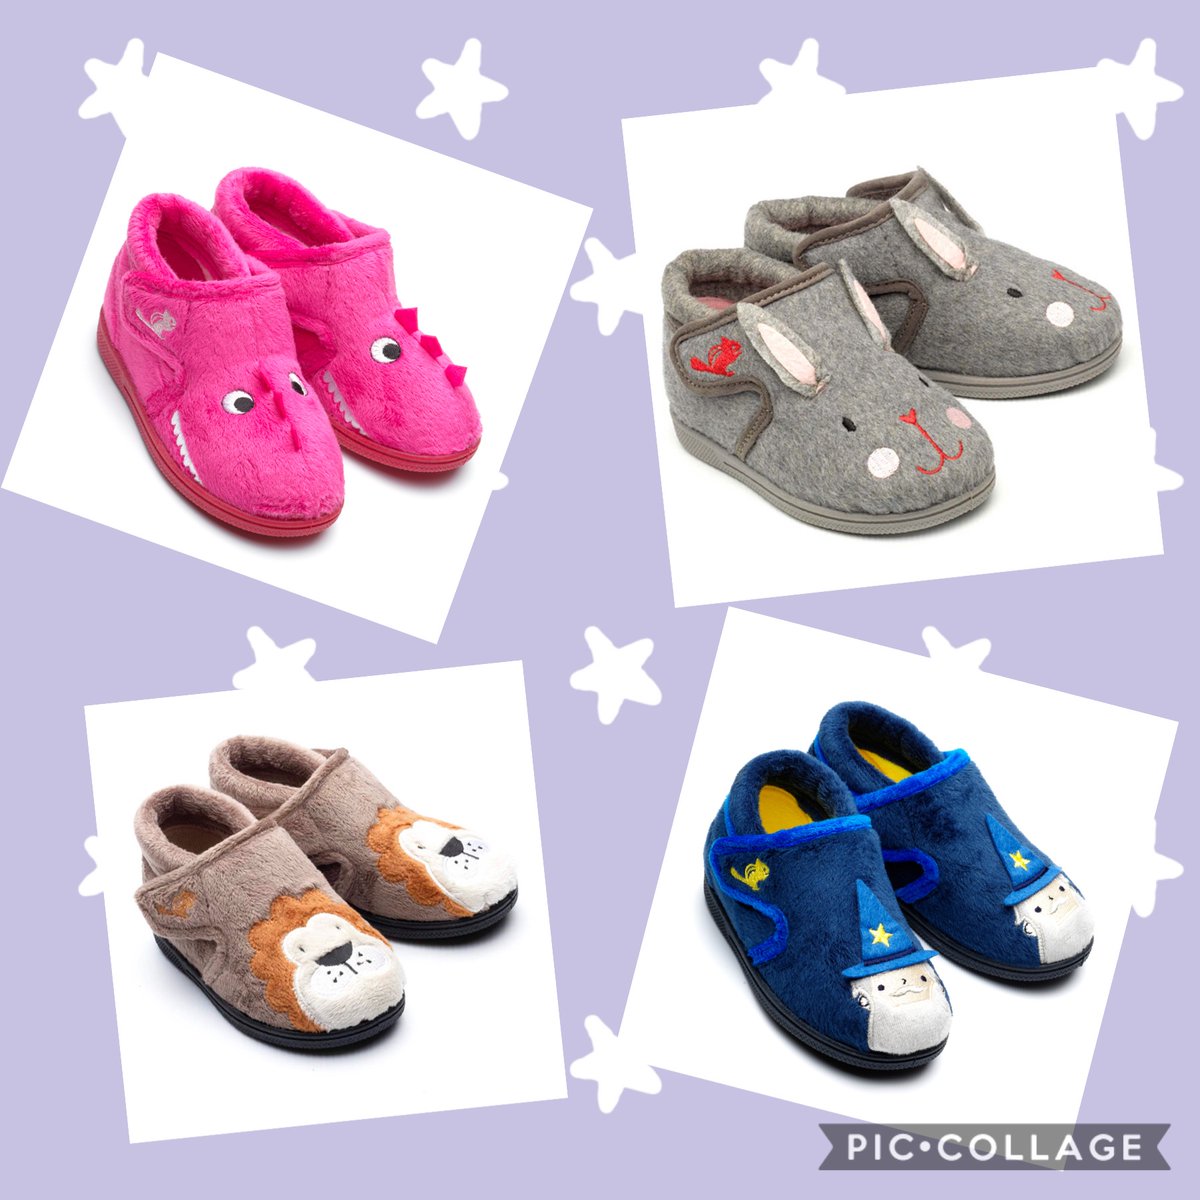 These are just a few of our cute and cosy slippers 👣
Keep those little toes cosy this winter 🤩
#bearsden #helensburgh #mauchline #weloveslippers #shoplocal #perfectpressie